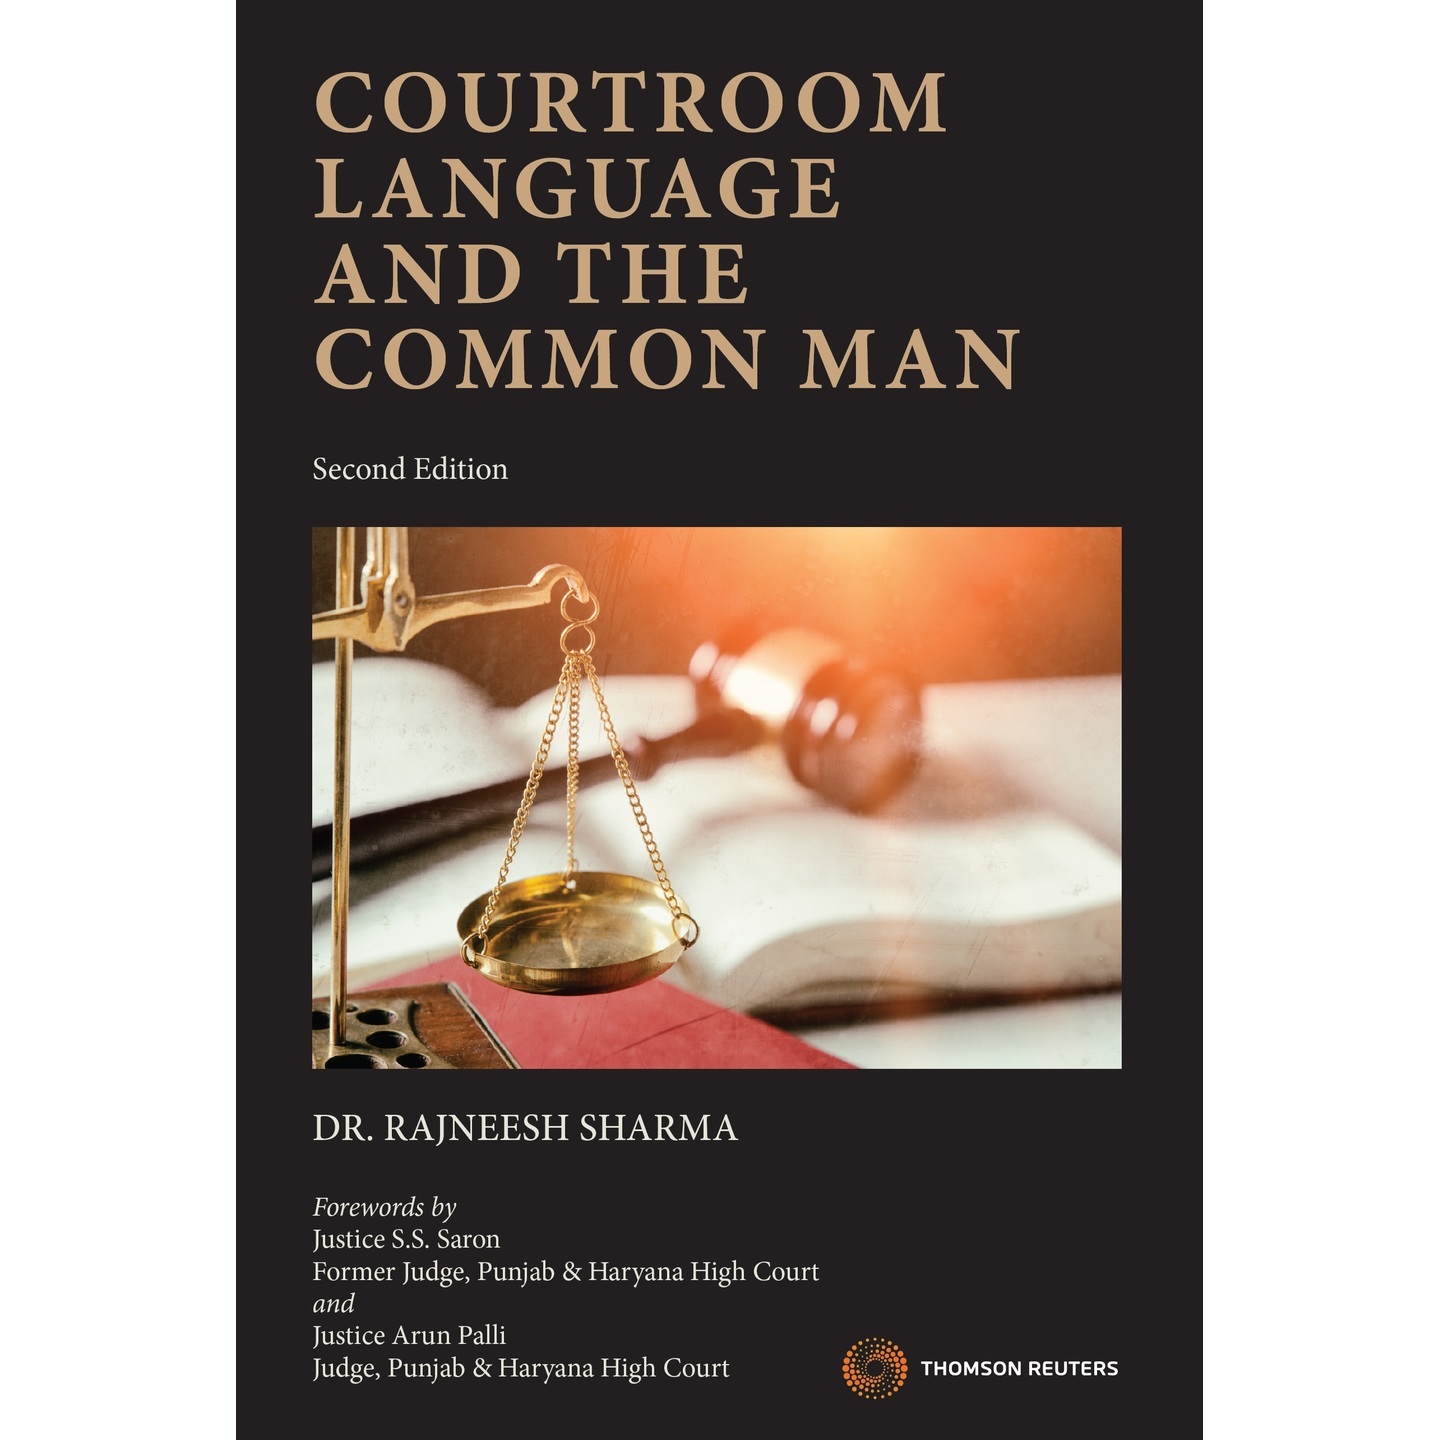 Courtroom Language and the Common Man